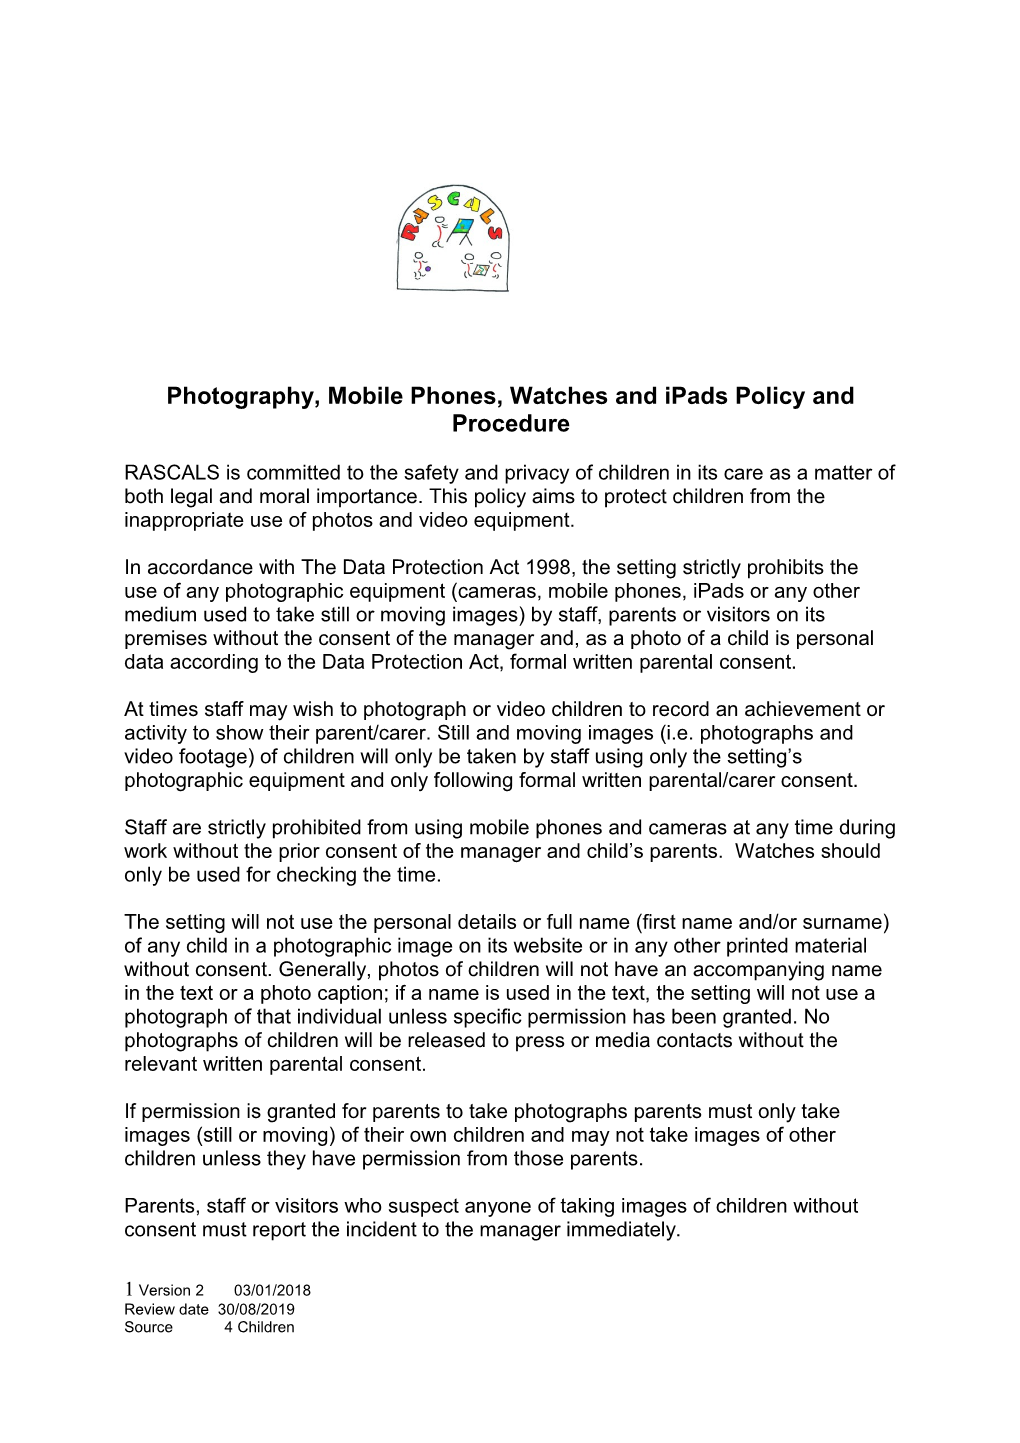 Photography, Mobile Phones, Watches and Ipads Policy and Procedure